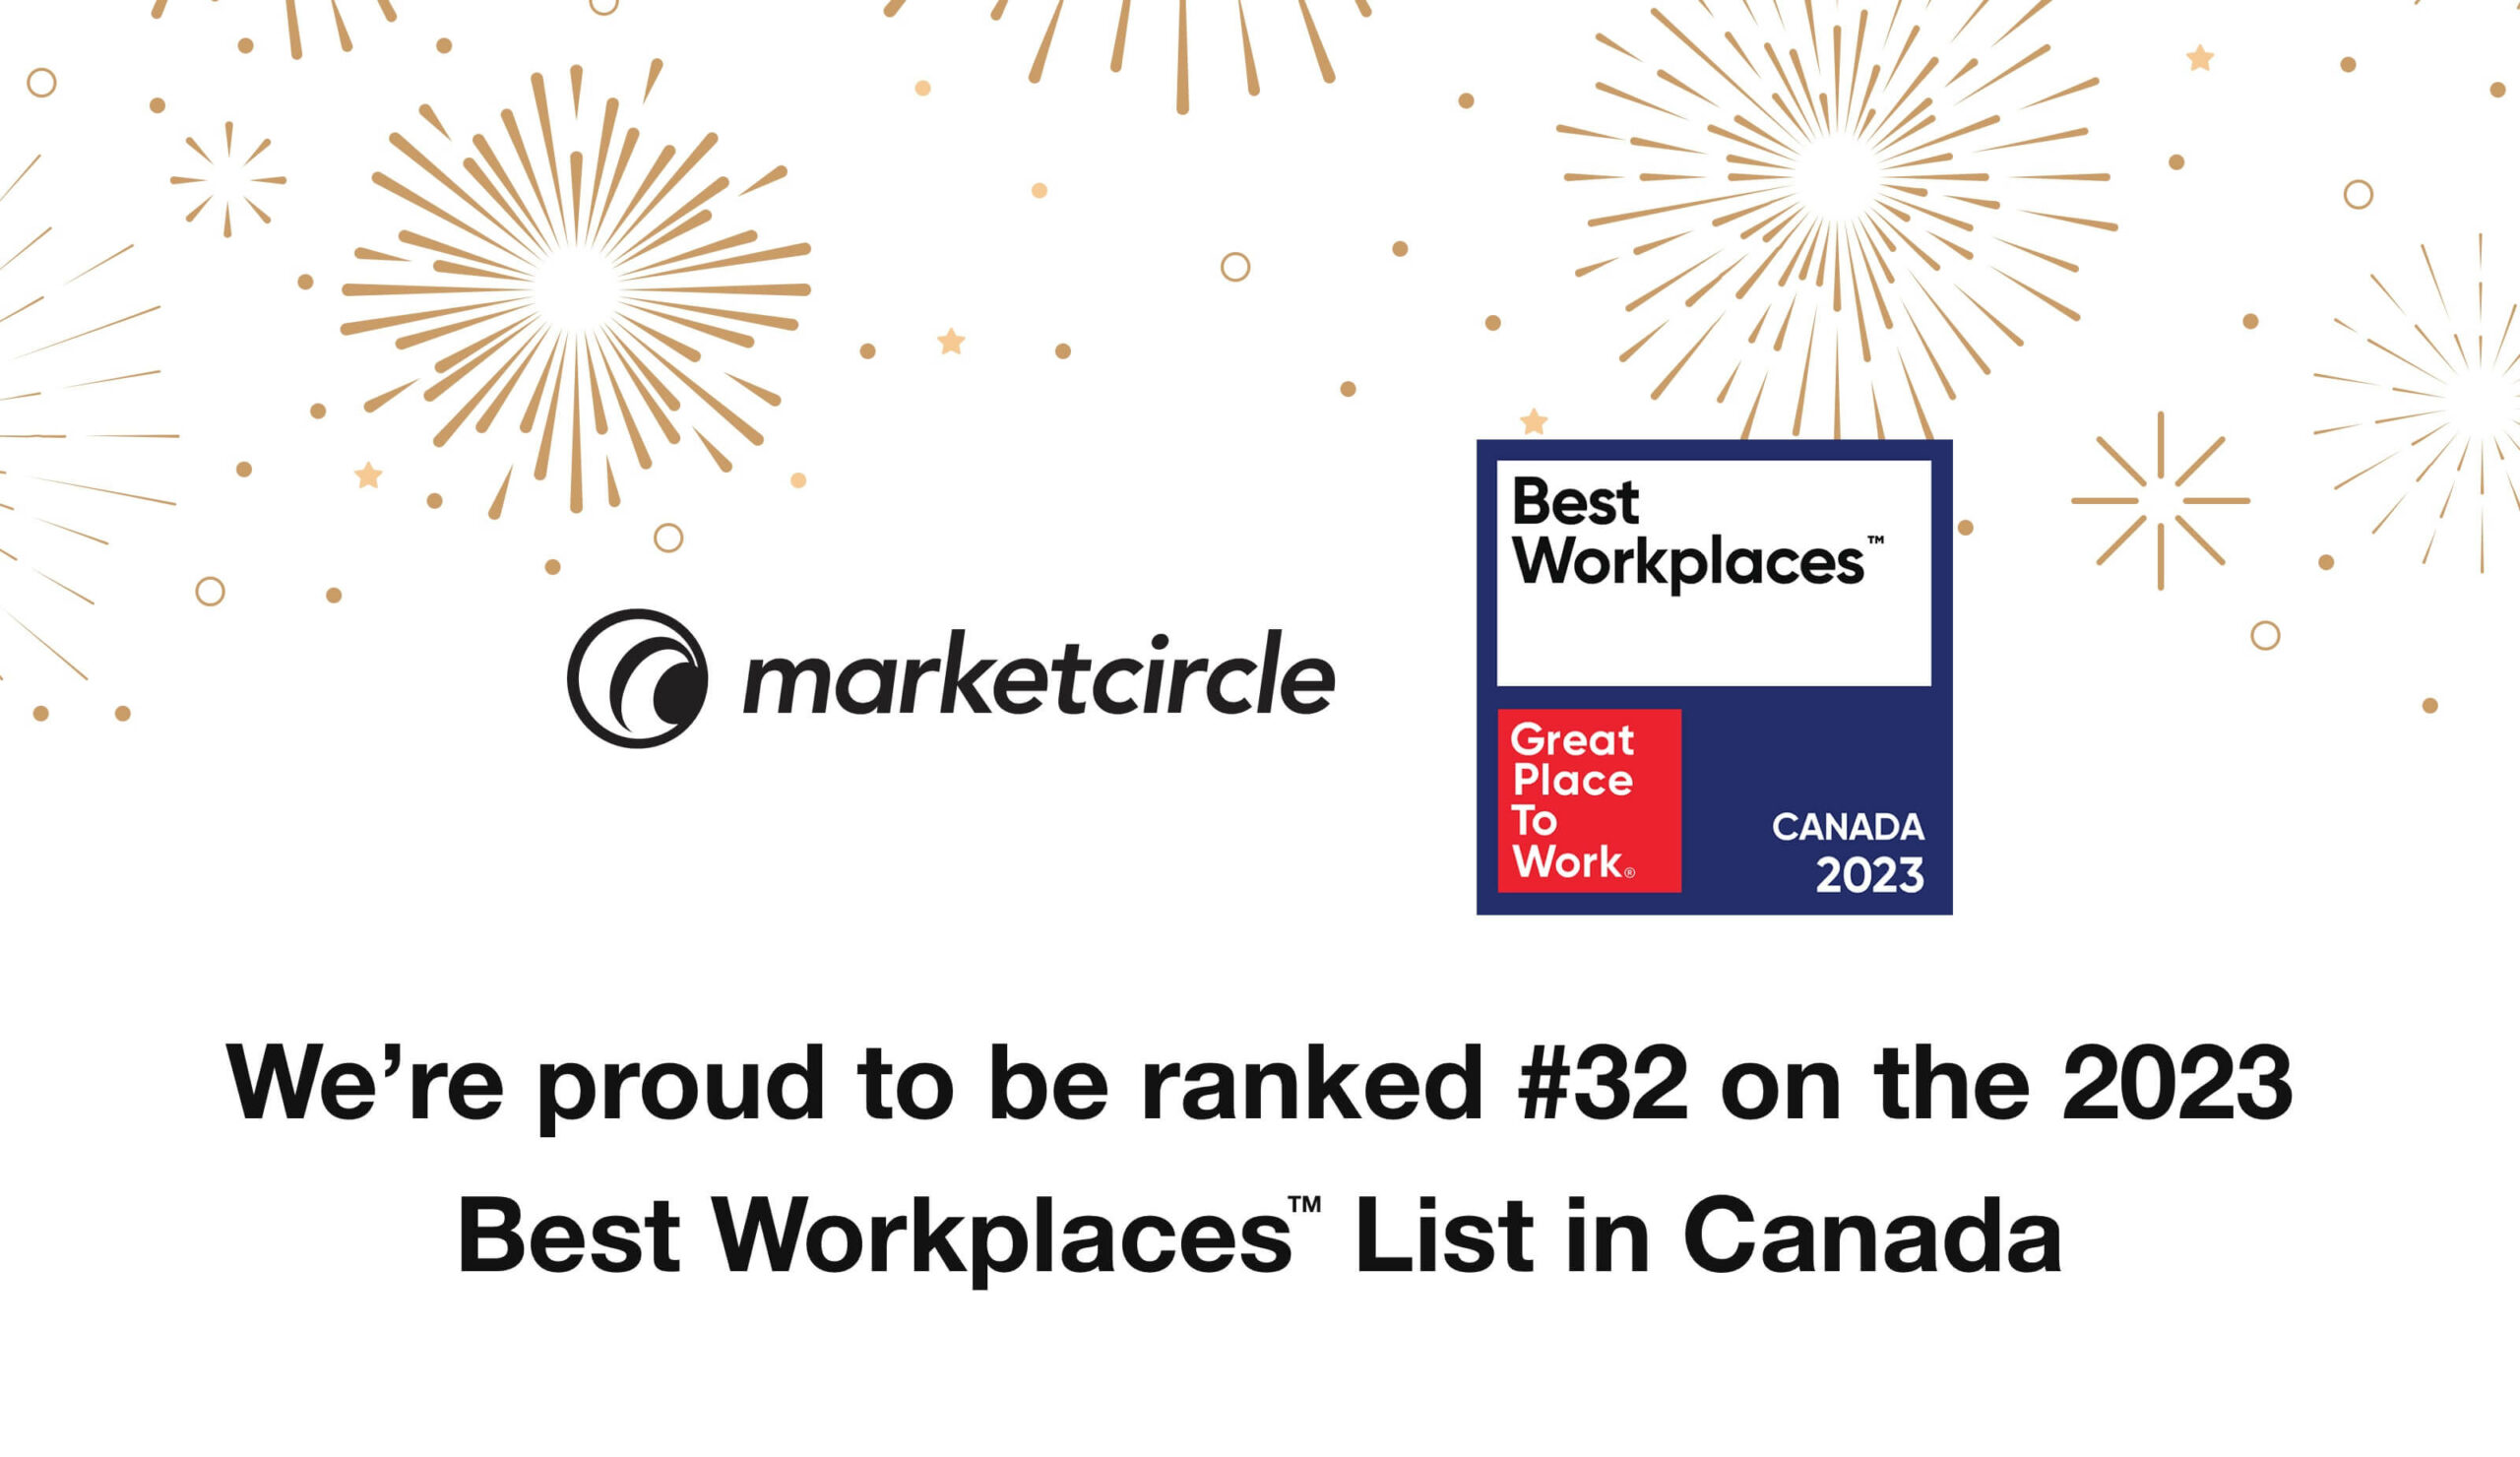 Image shows the Marketcircle logo beside the Best Workplaces in Canada badge at the center. White background with golden fireworks. Title says “We’re proud to be ranked #32 on the 2023 Best Workplaces™ List in Canada!” 